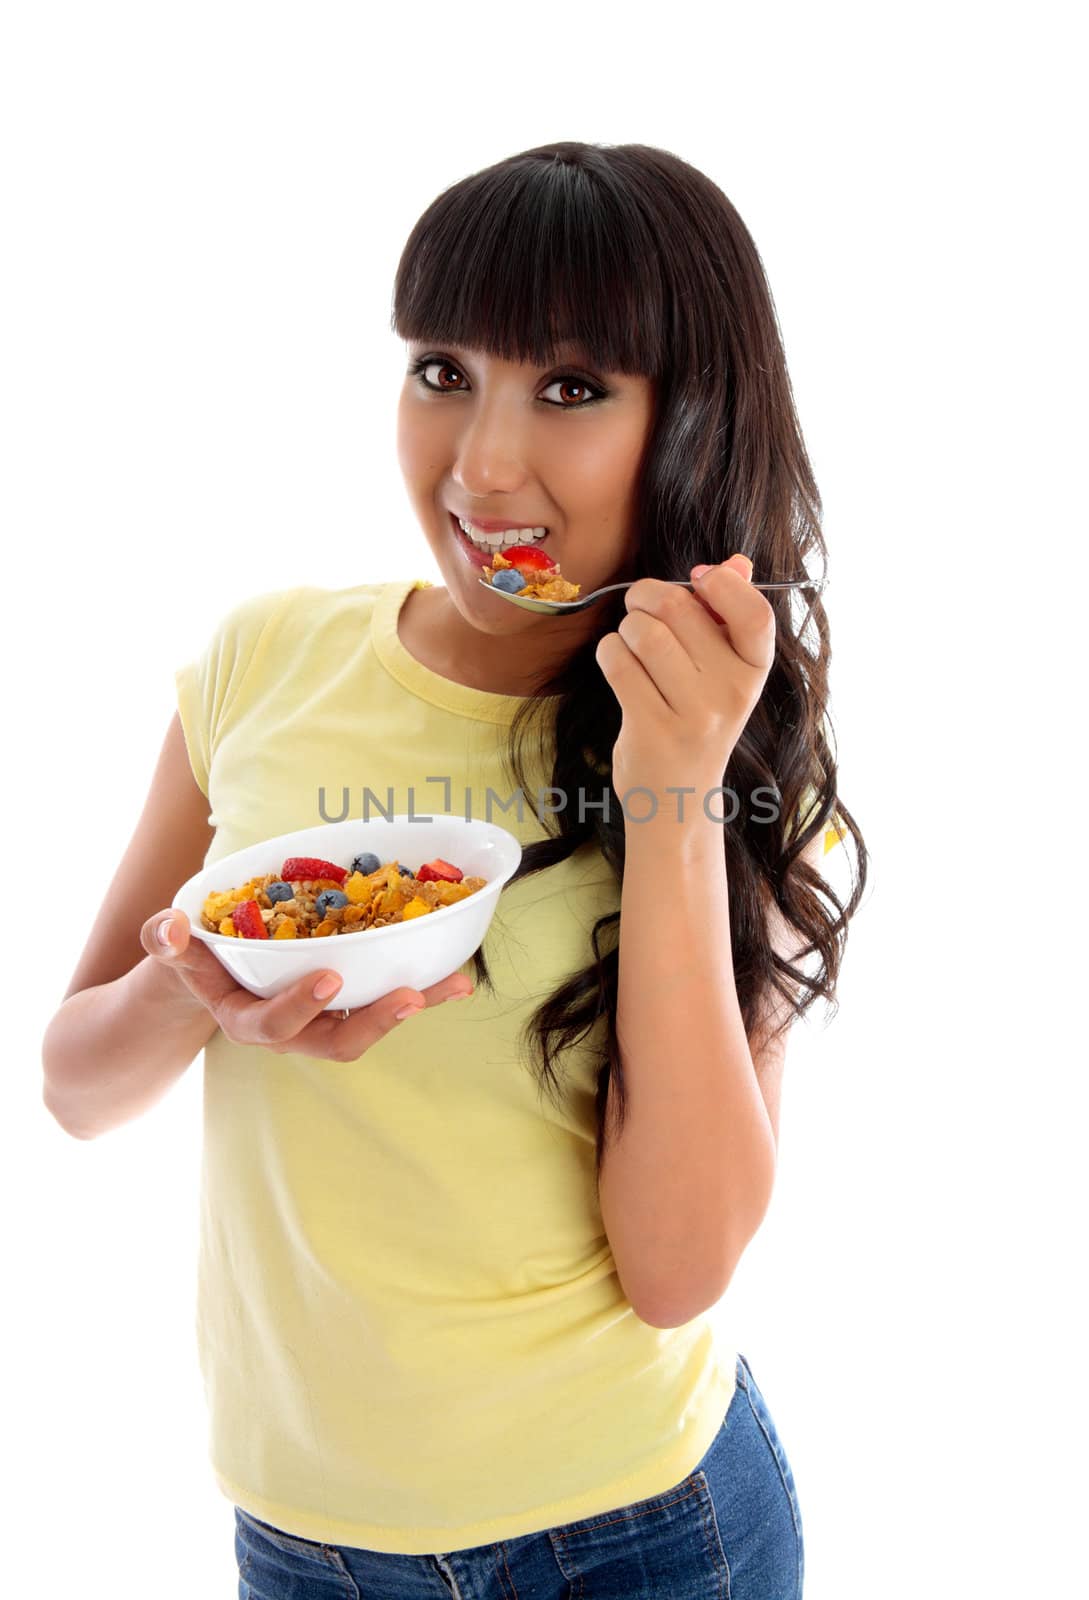 A young happy woman enjoying eating delicious cereal.  White background.